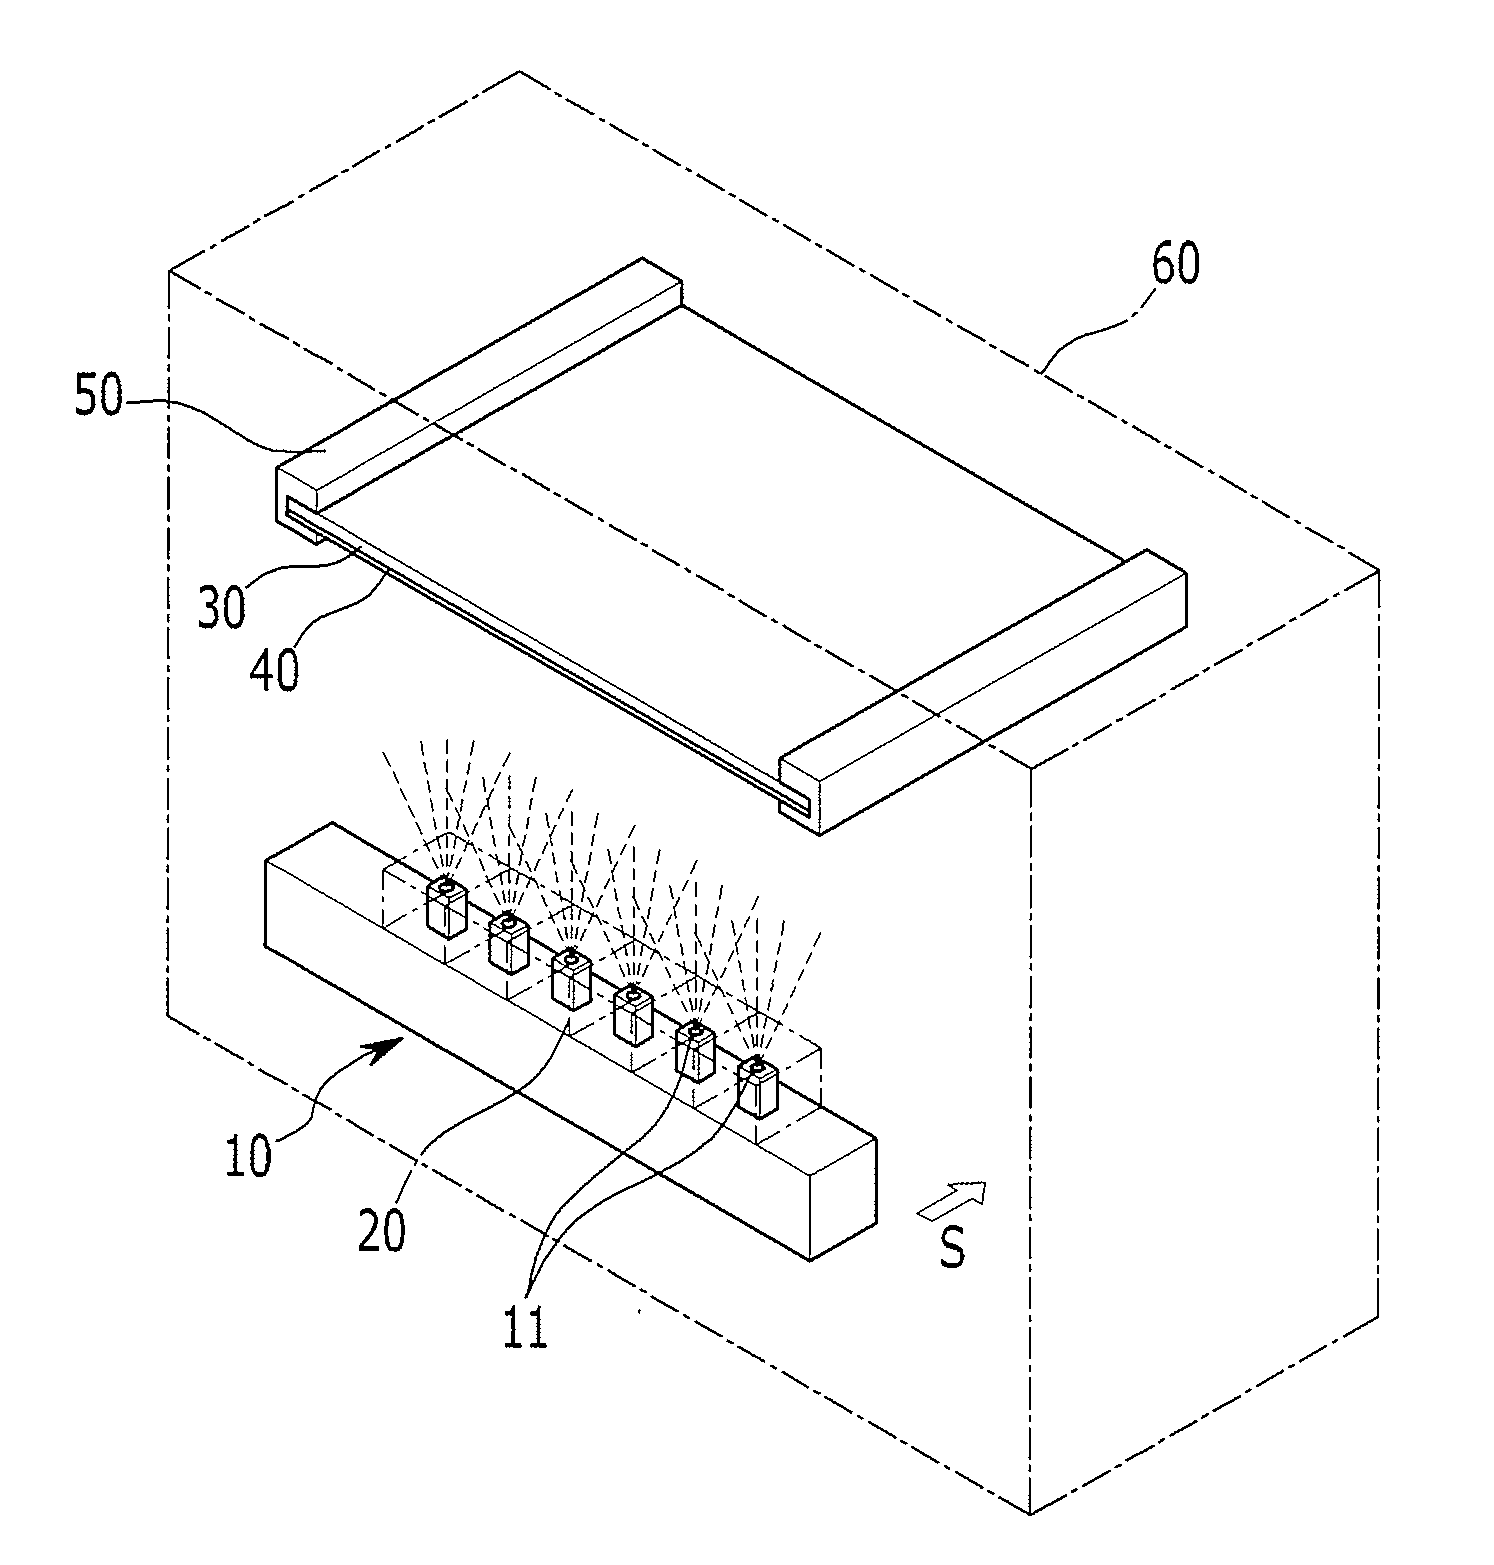 Device and method for depositing organic material